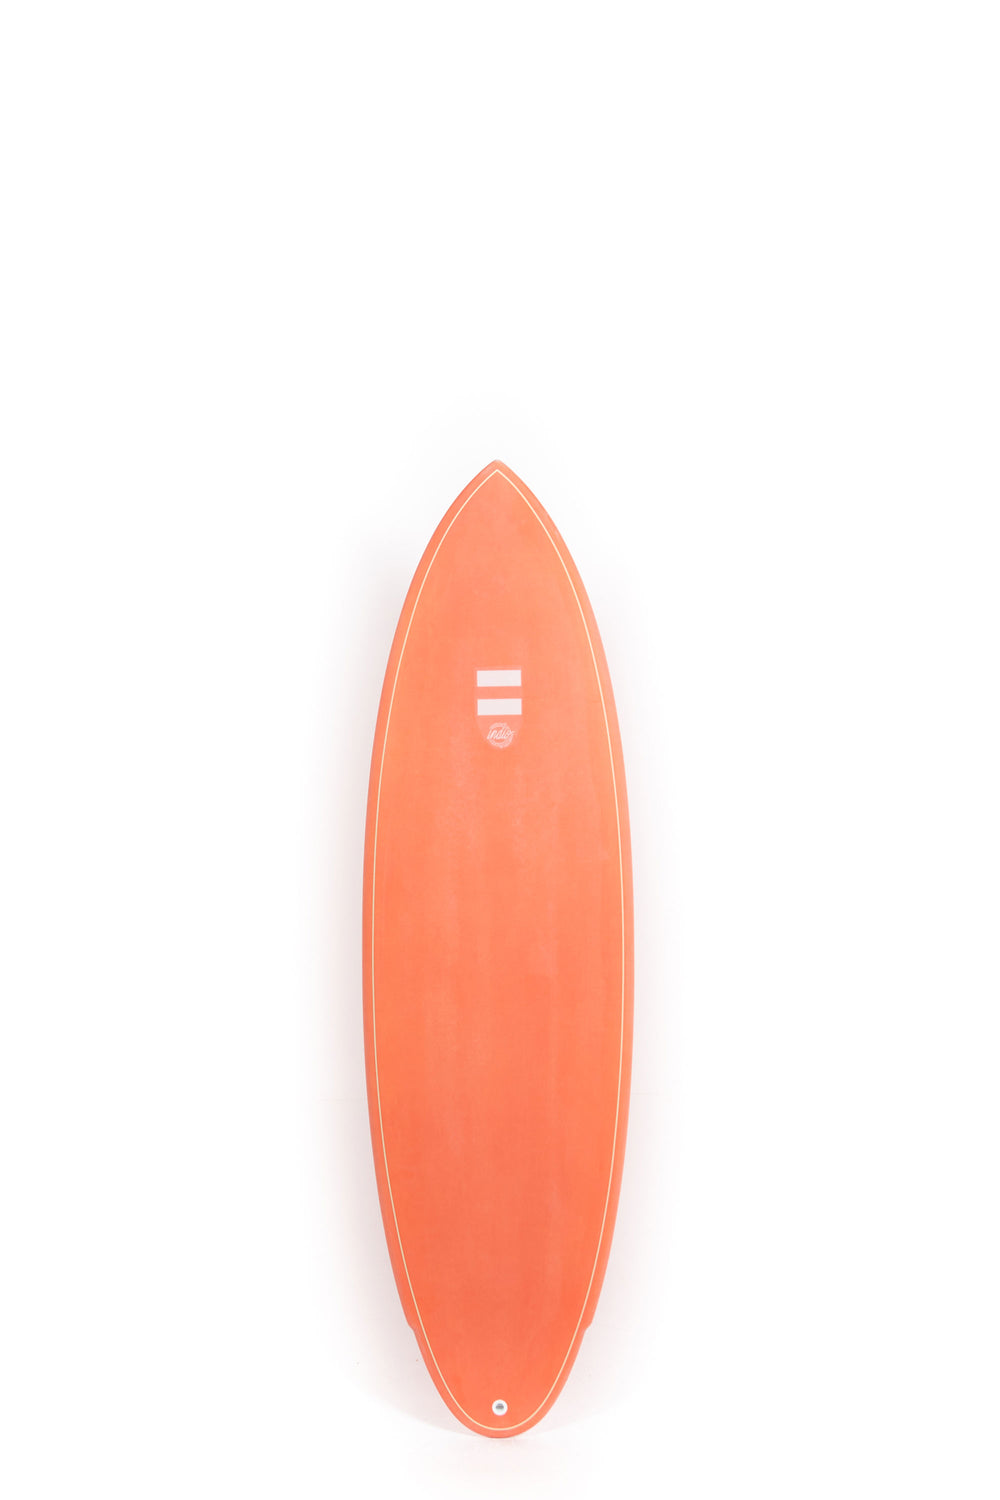 Pukas Surf Shop Indio Surfboards Rancho Red Fall 6'2